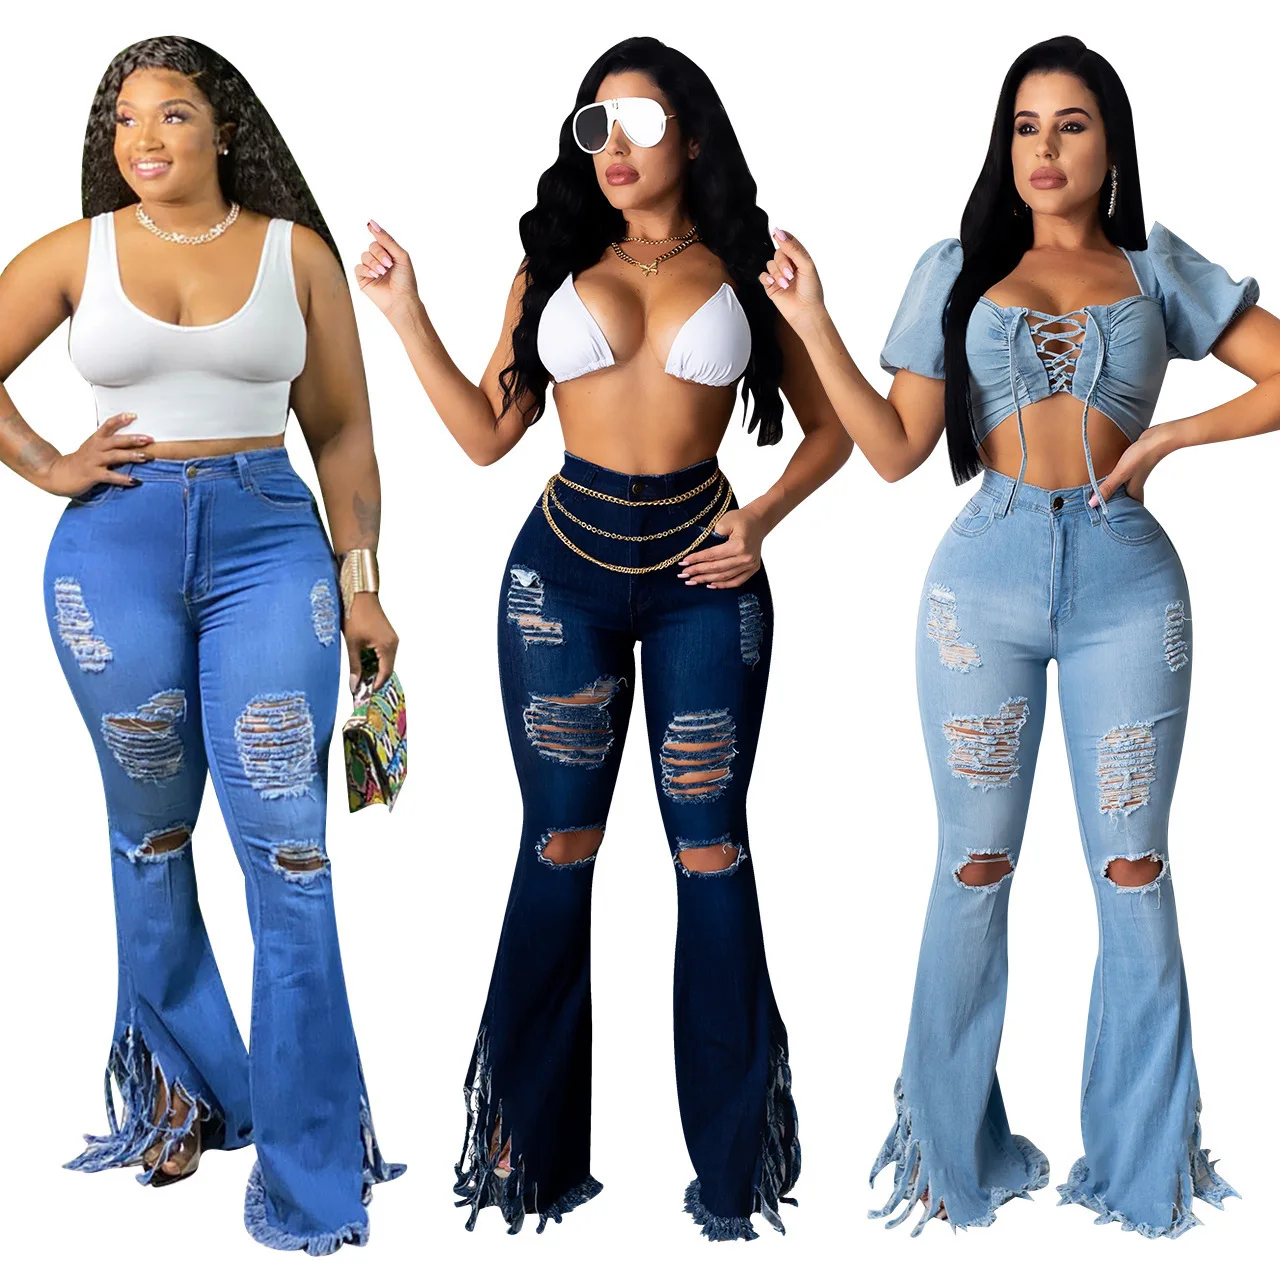 

Washed Laddies Denim Jeans Pants Fringed Bell Bottoms Flare Ripped Jeans Stlylish High Waist Boot Cut Blue Jean Belle Bottoms